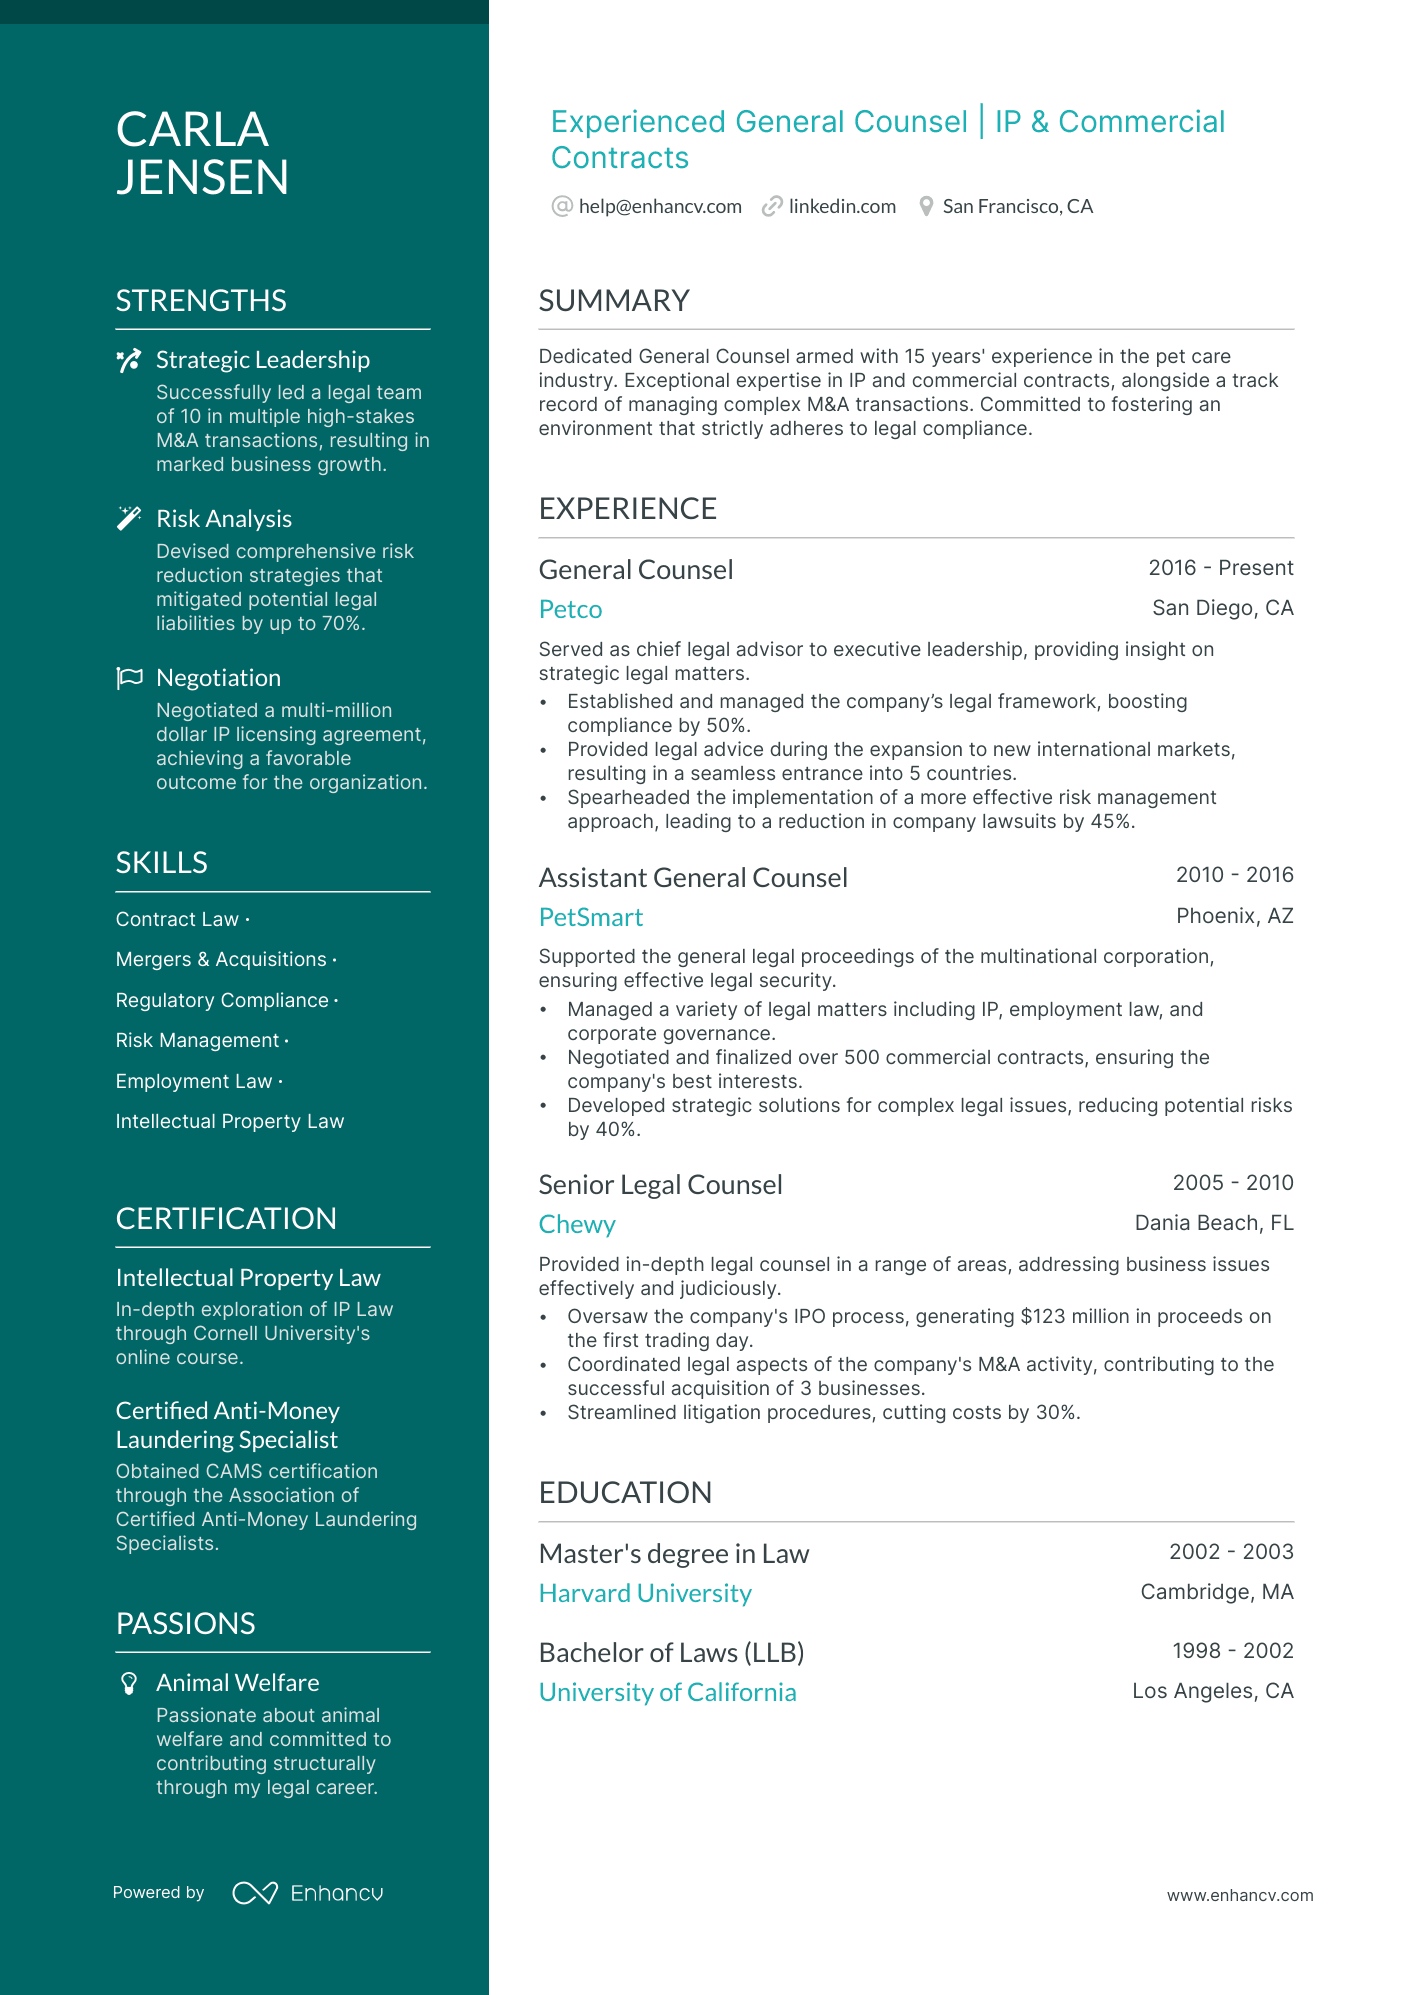 General Counsel resume example